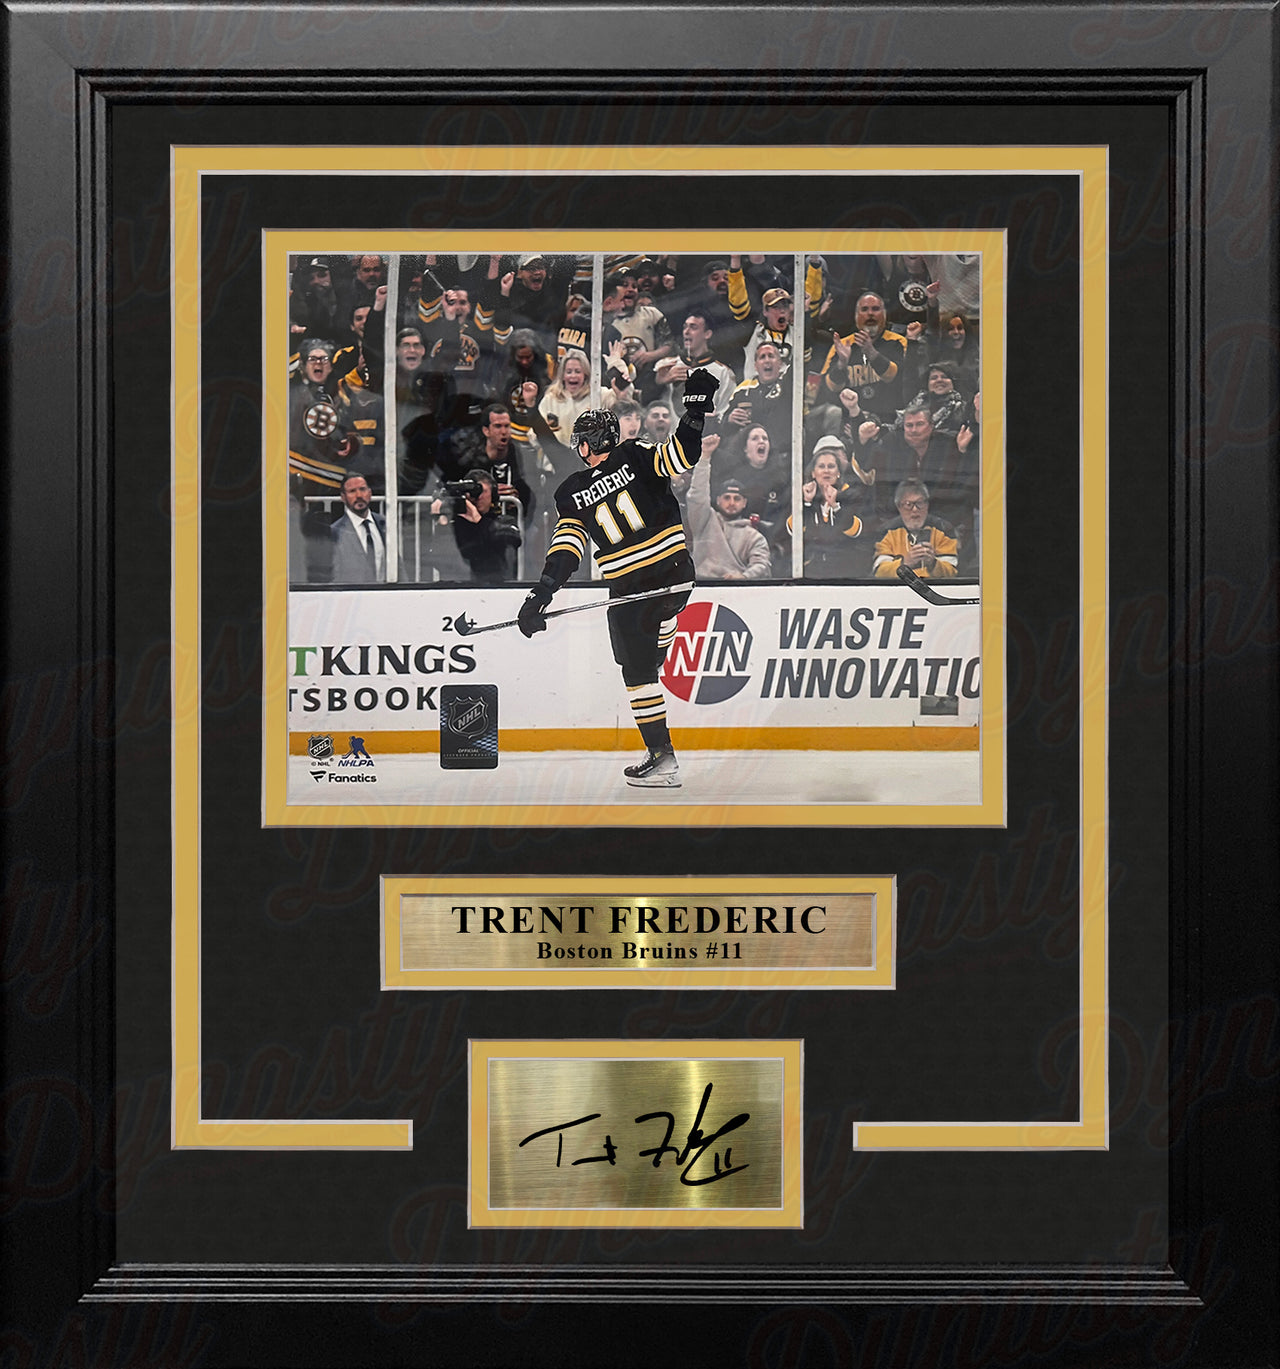 Trent Frederic Goal Celebration Boston Bruins 8" x 10" Framed Hockey Photo with Engraved Autograph